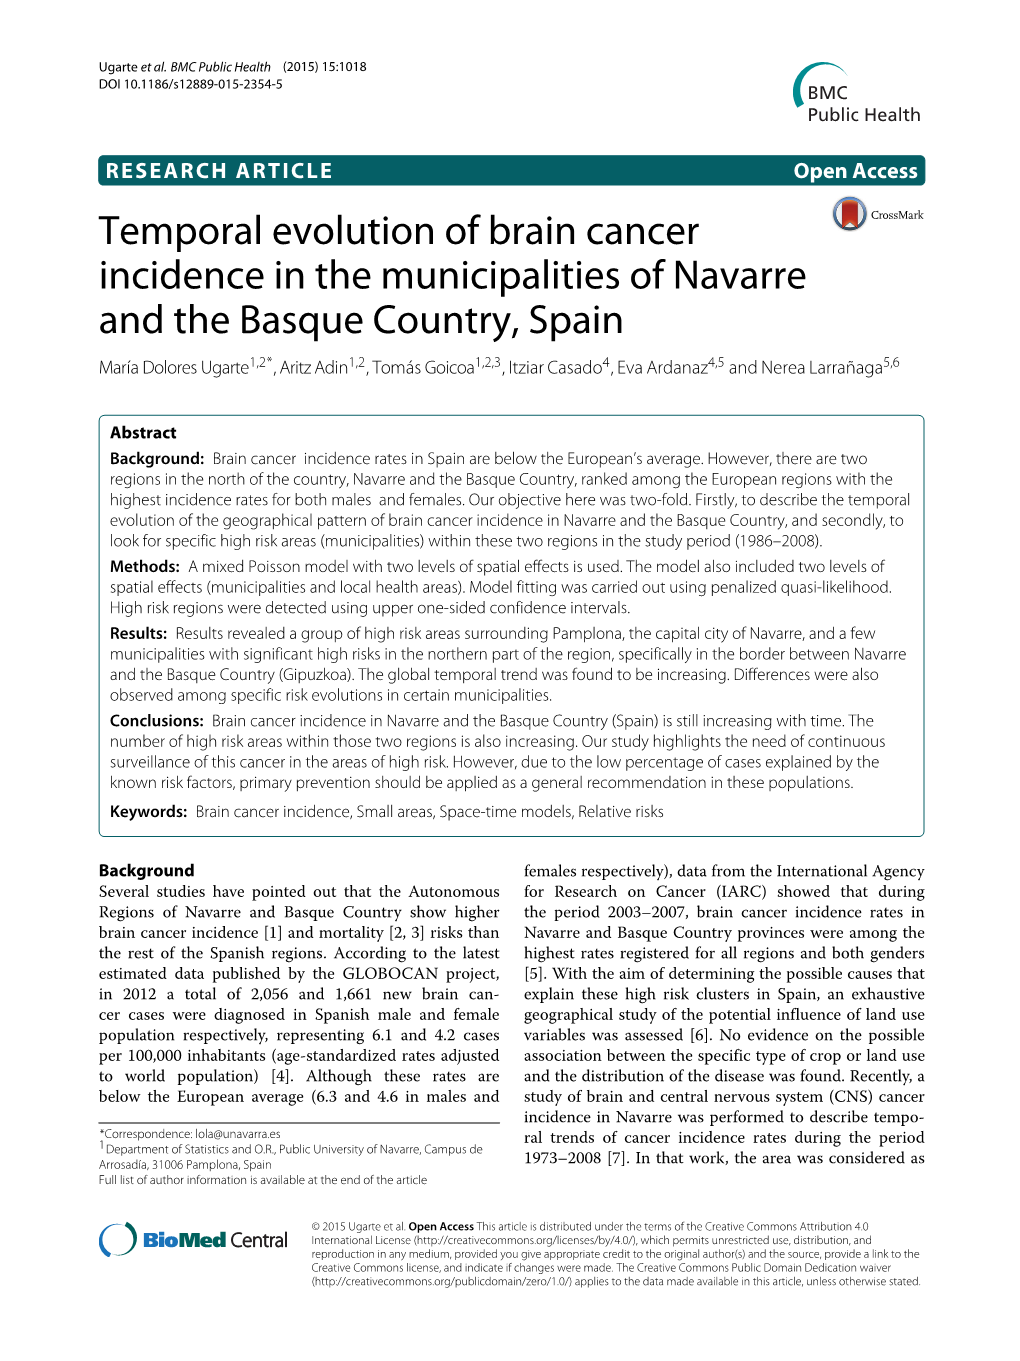 Temporal Evolution of Brain Cancer Incidence in the Municipalities Of